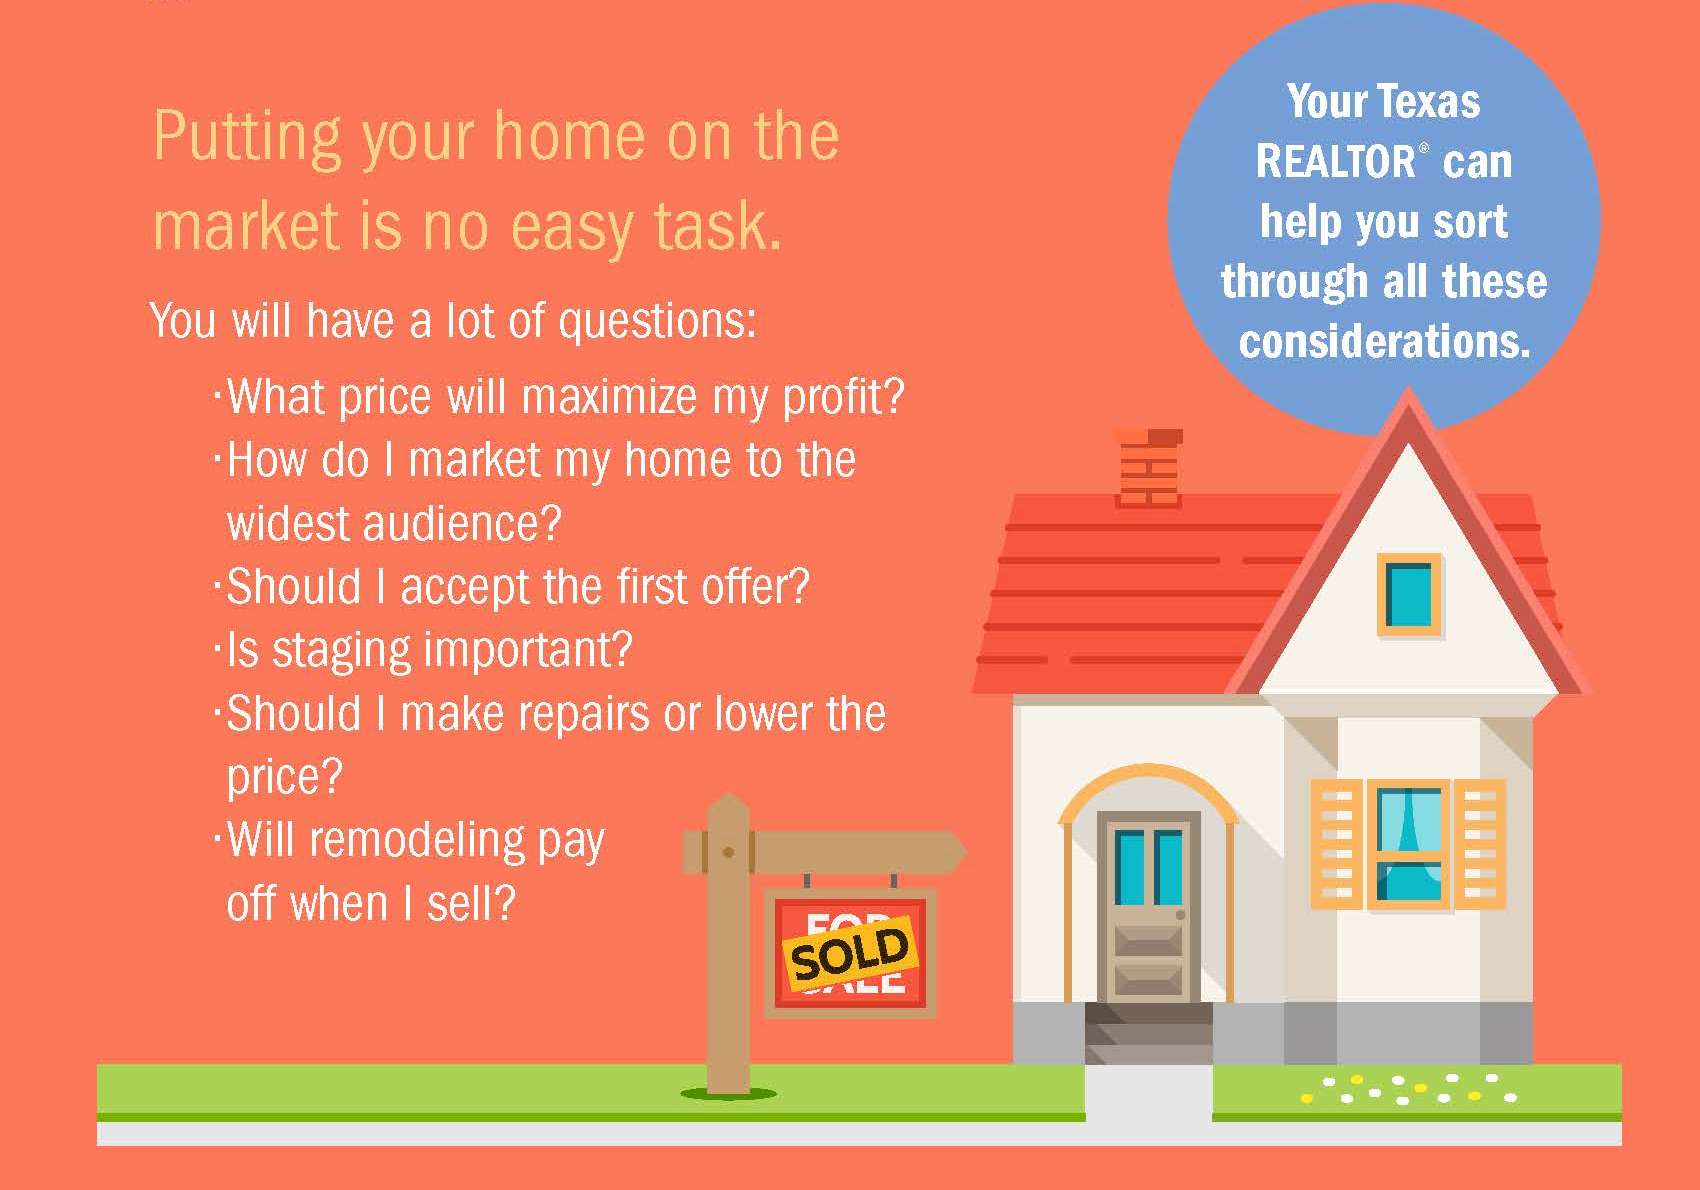 Tips For Sellers From Texas Realtors